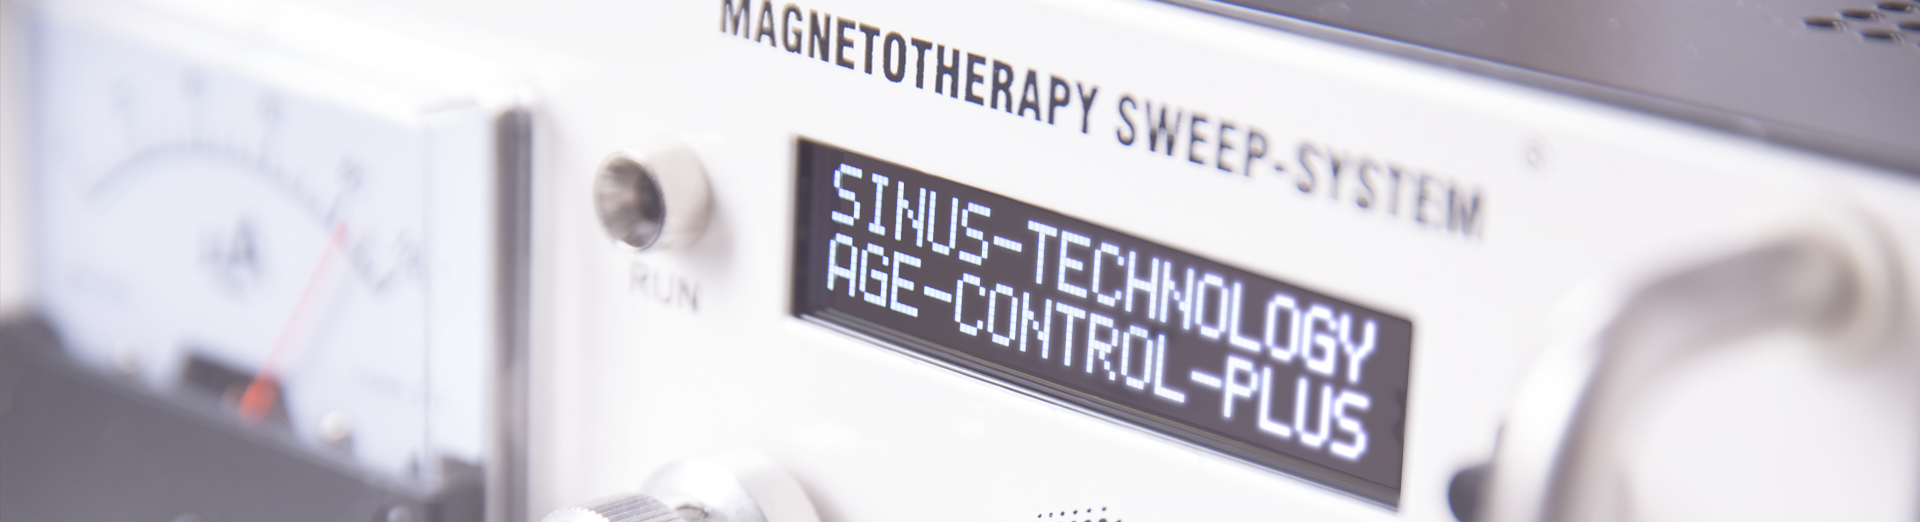 SINUS-TECHNOLOGY MAGNETOTHERAPY